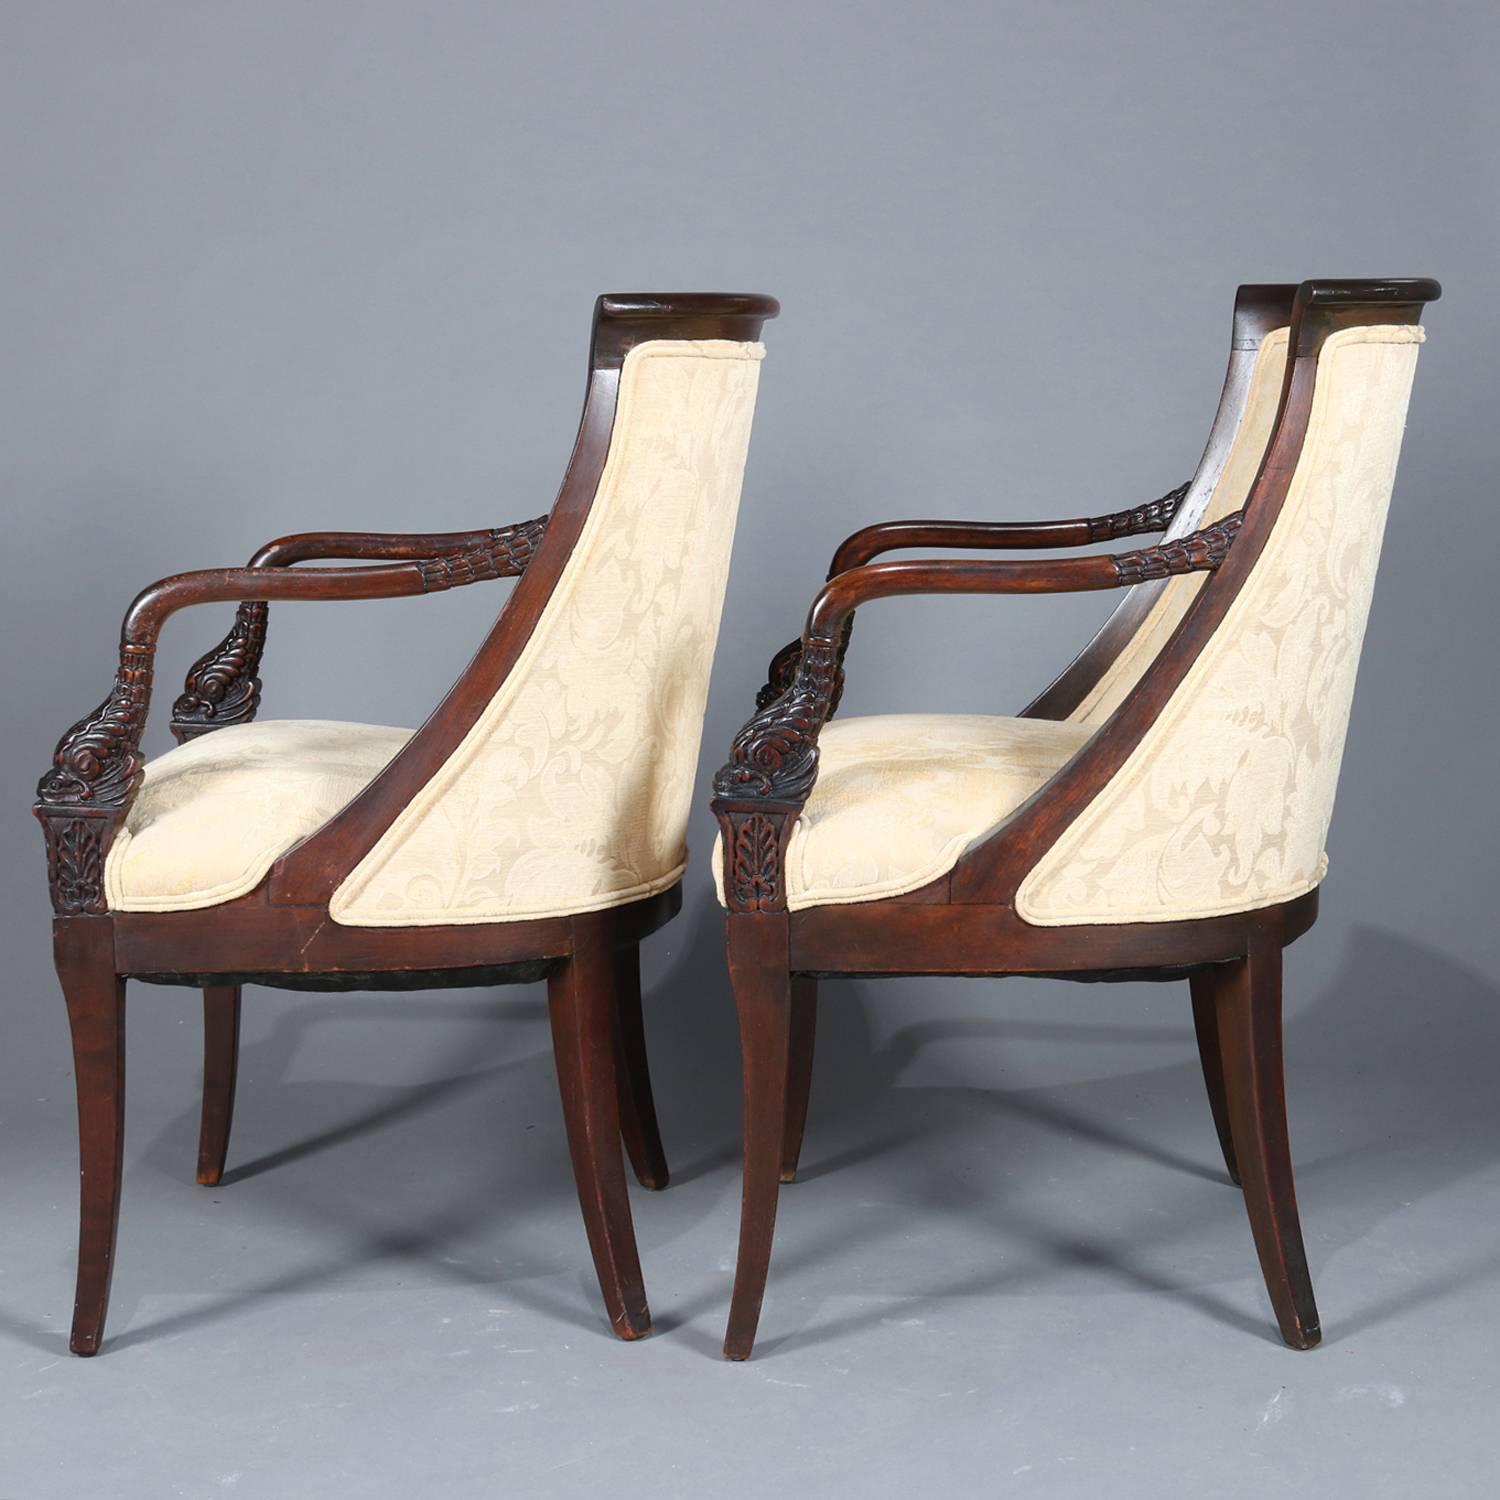 European Pair of Antique Figural Continental Carved Mahogany Dolphin Armchairs